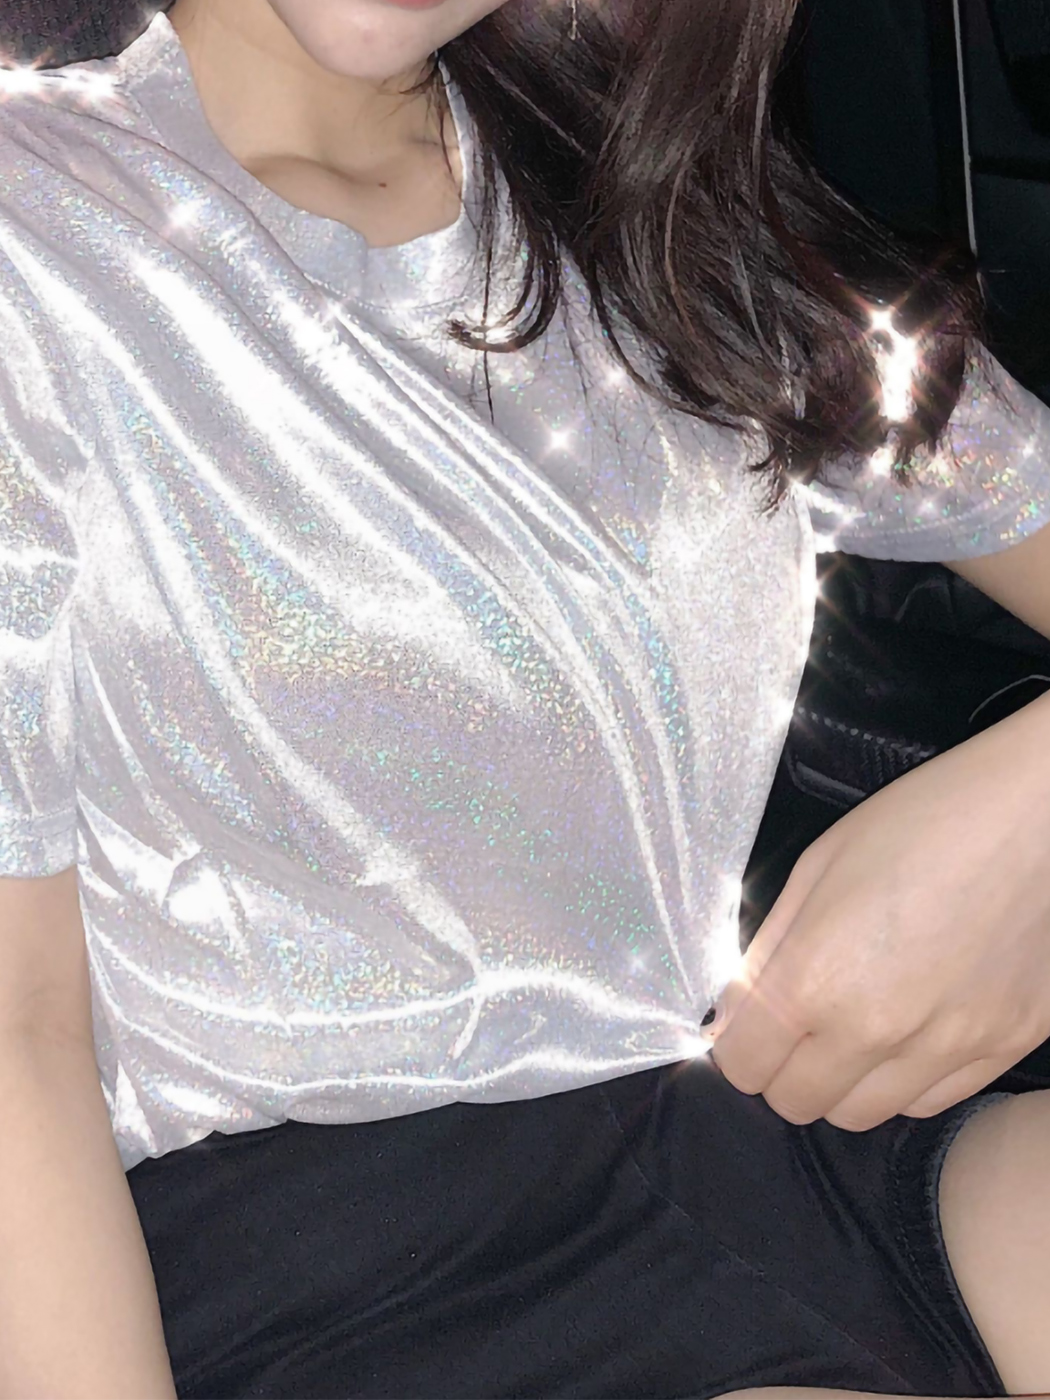 Women's Holographic Metallic Shirt Ultra Soft Top Glitter Party Disco Blouse - image 4 of 6